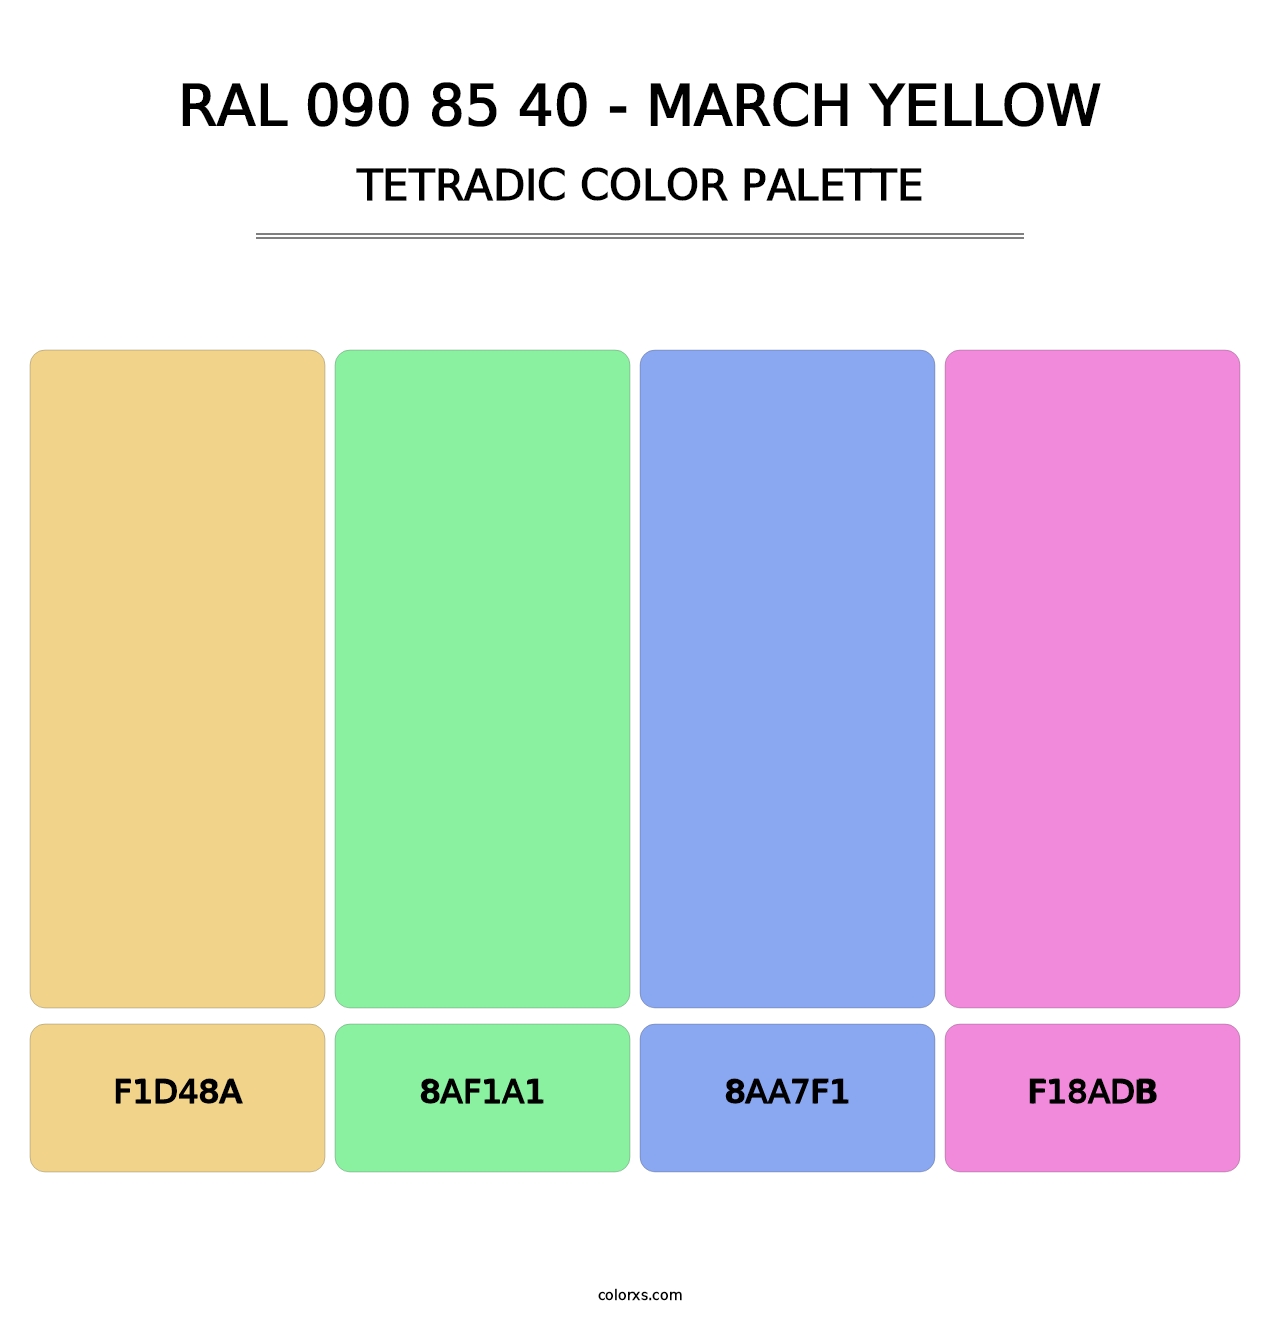 RAL 090 85 40 - March Yellow - Tetradic Color Palette